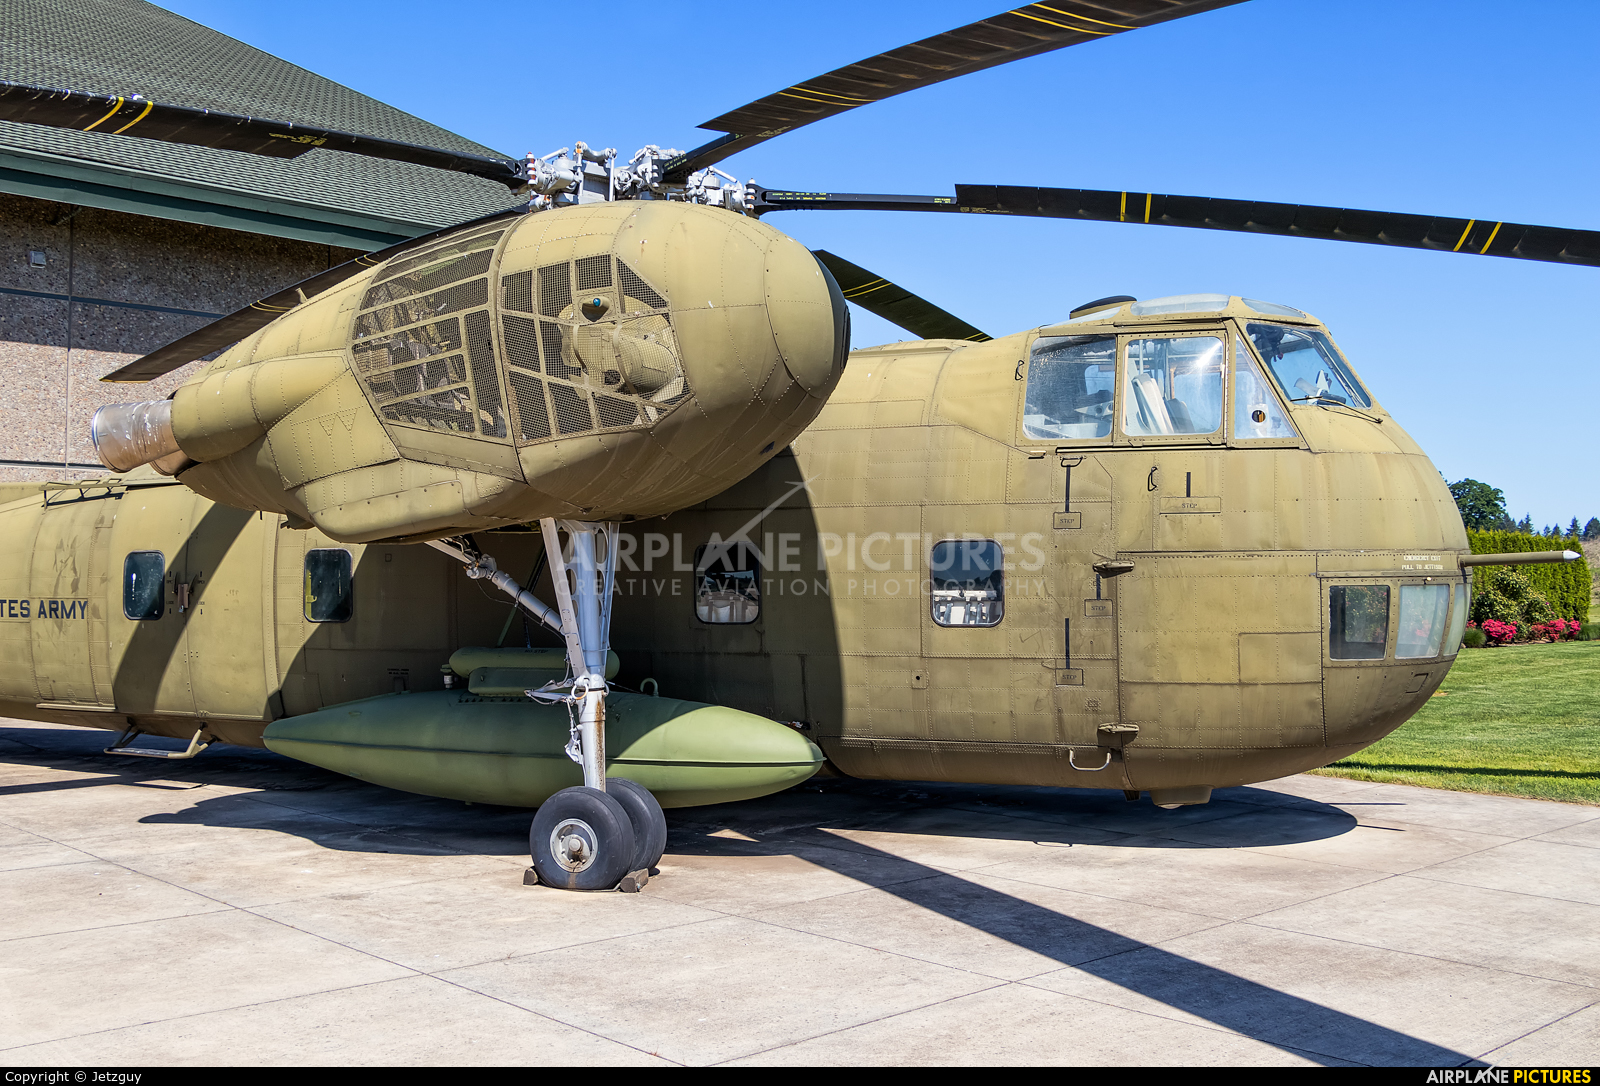 USA - Army 58-0999 aircraft at McMinnville - Evergreen Aviation & Space Museum